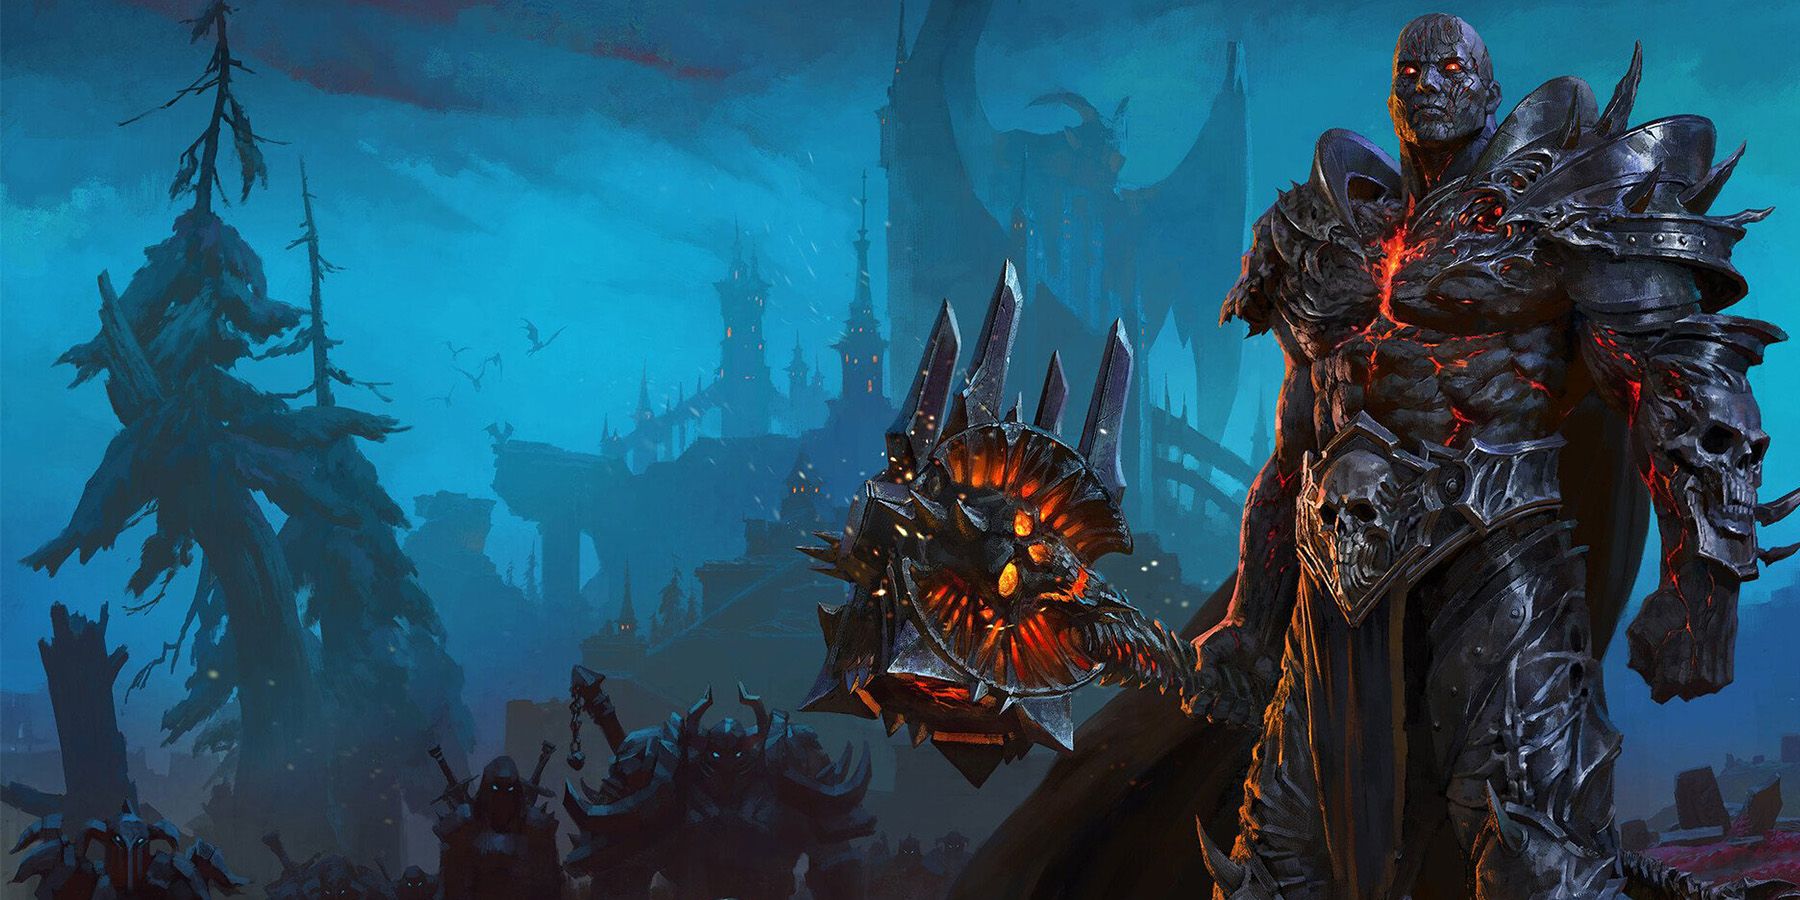 Warcraft: Bolver Fordragon's Journey to Become the Lich King